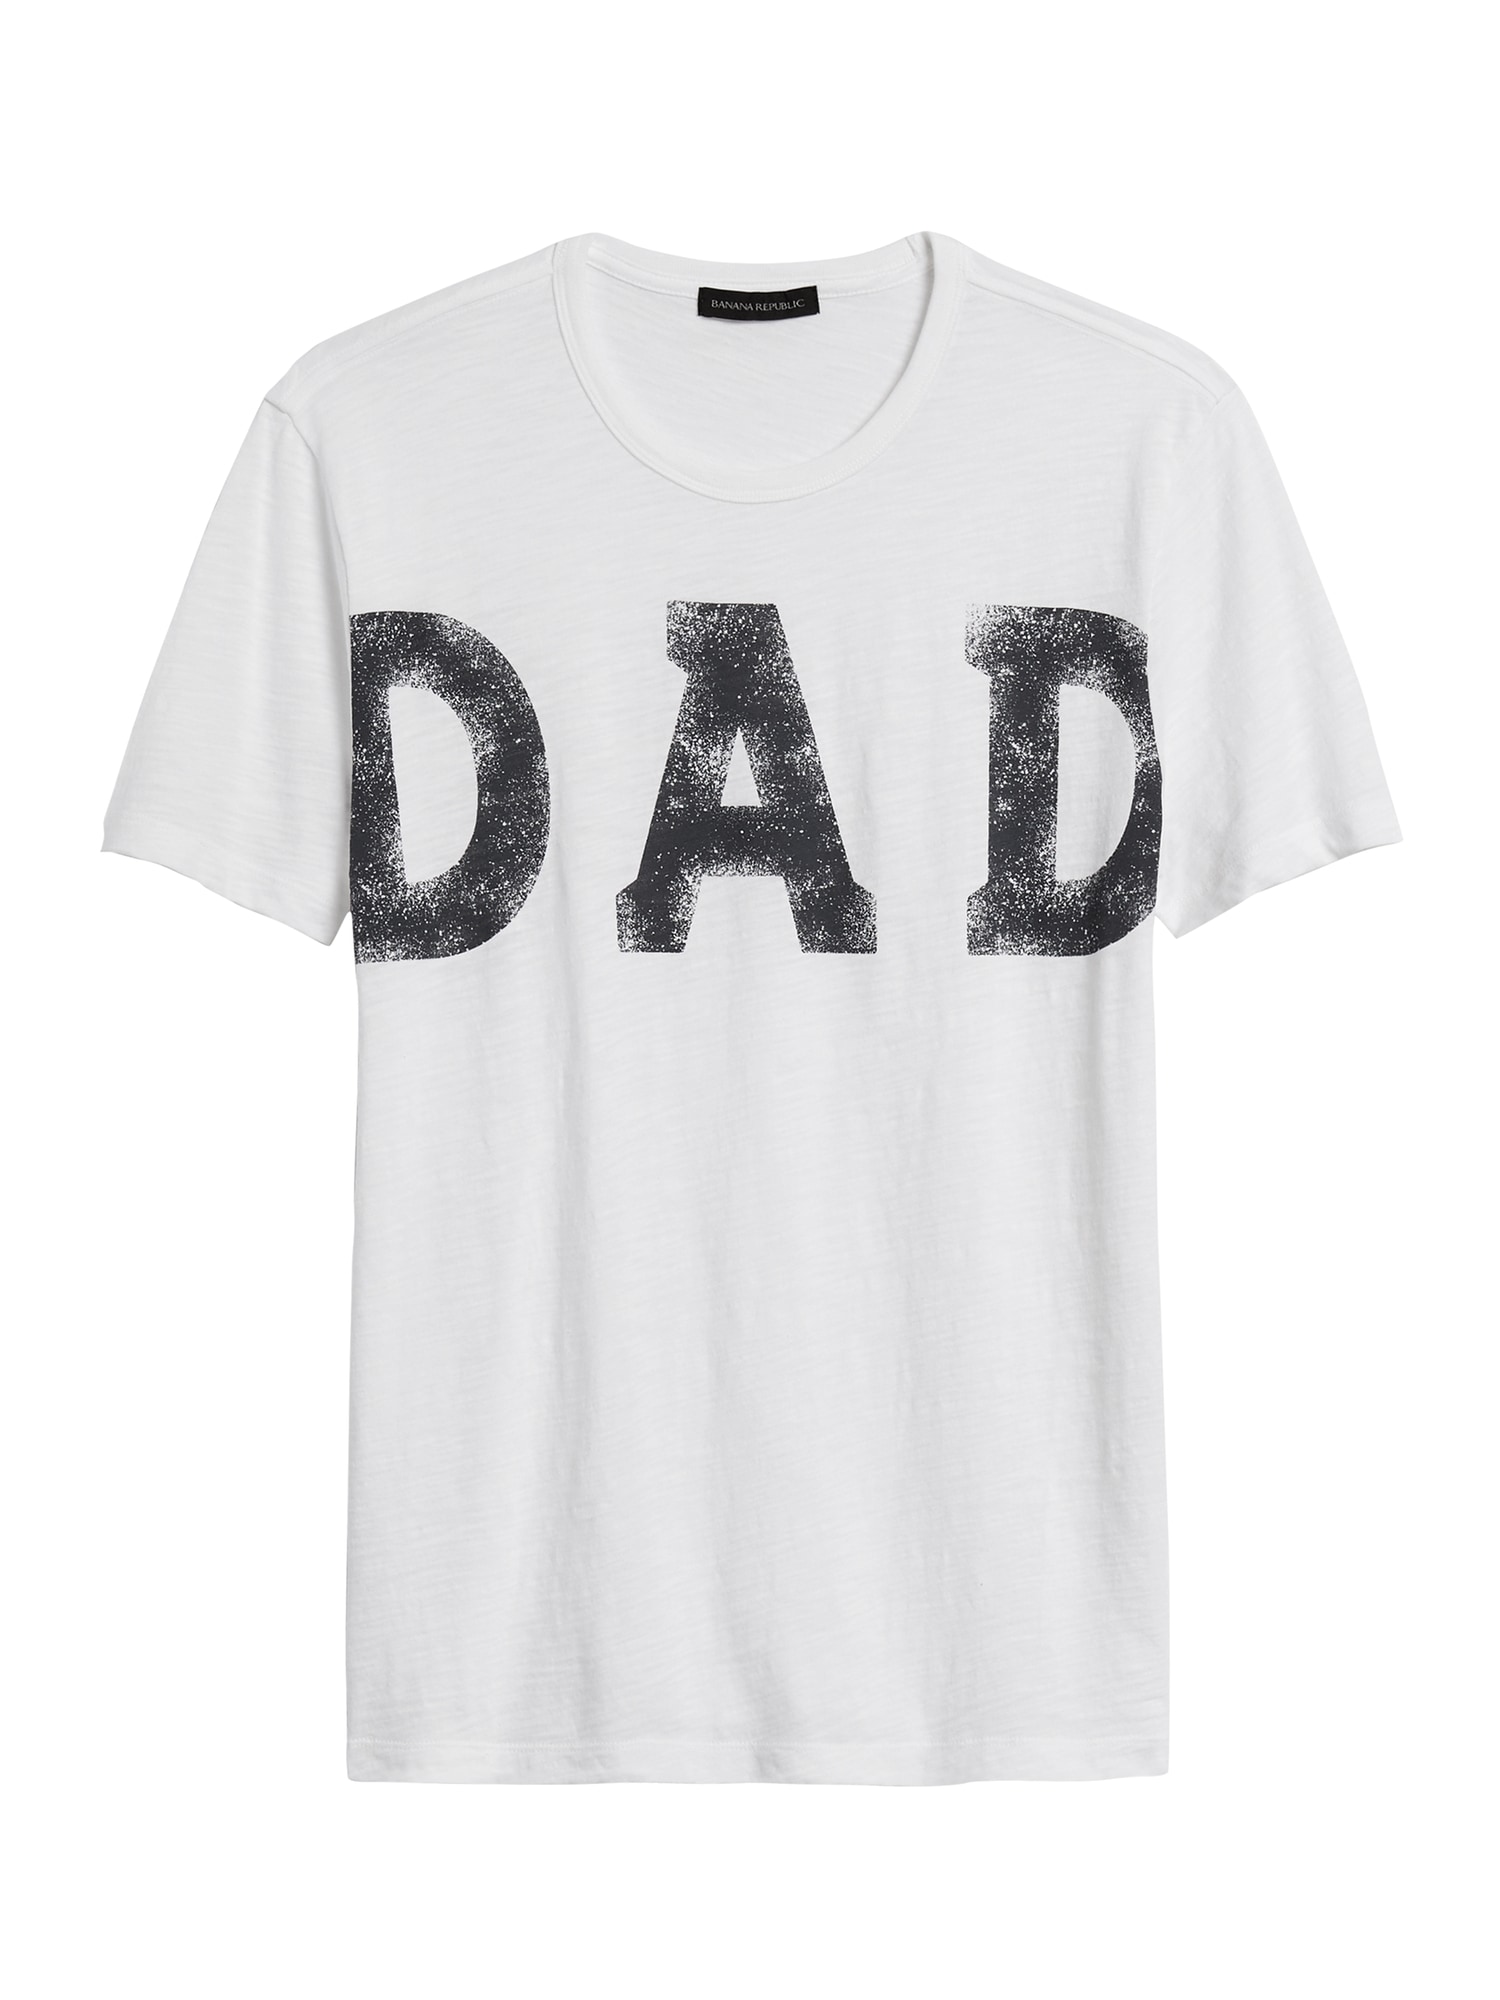 Dad Graphic T-Shirt